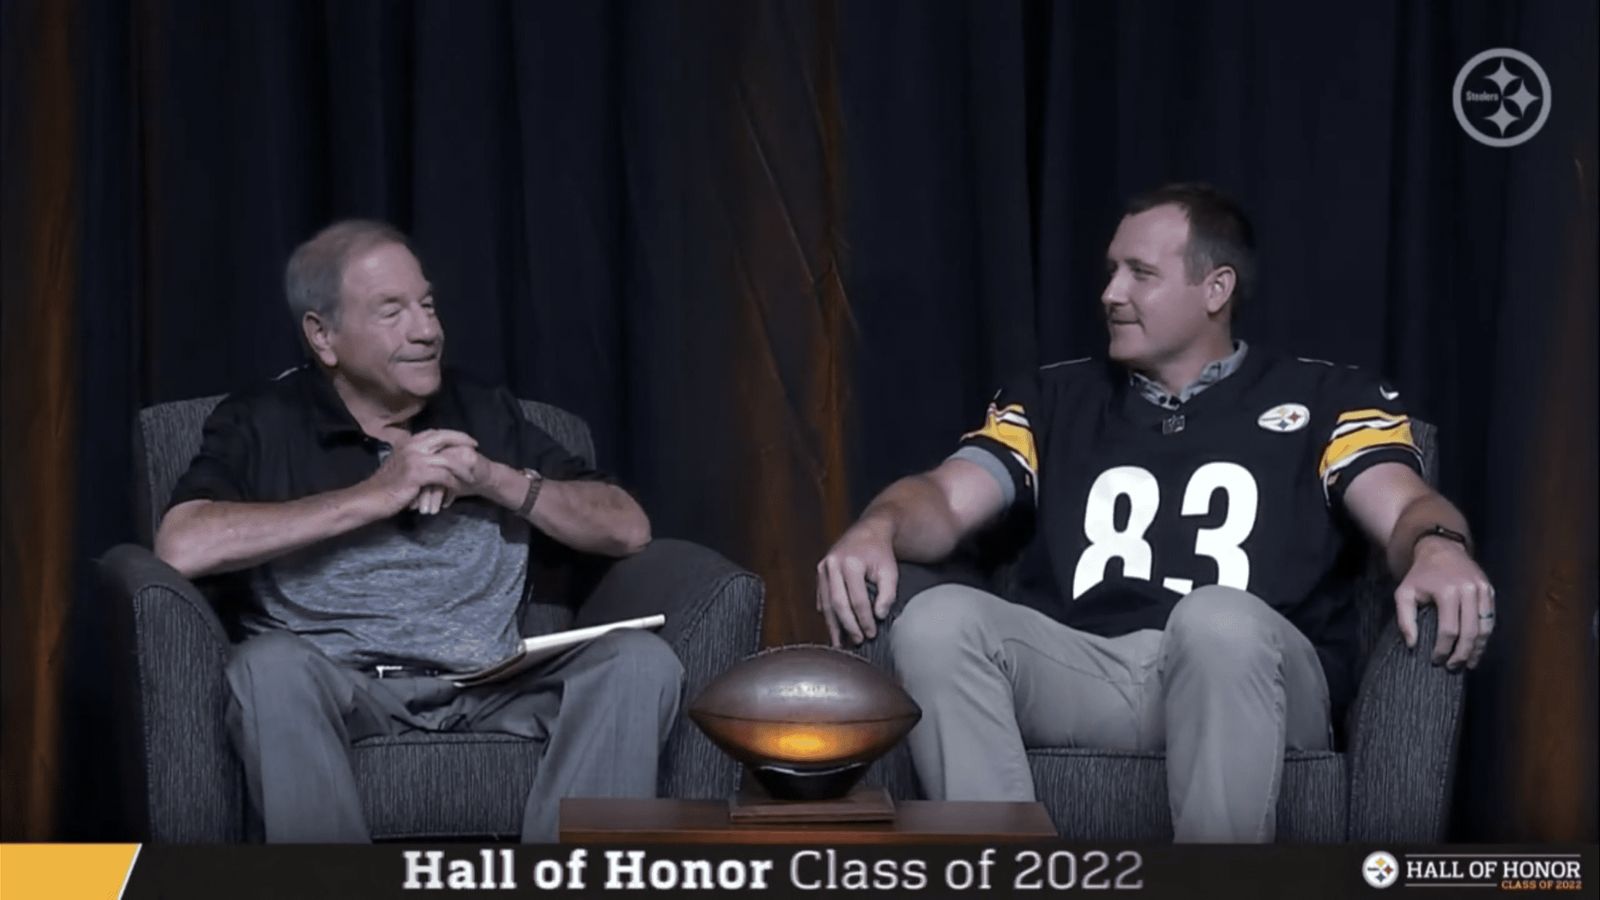 Heath Miller On Being Inducted To The Steelers 2022 Hall Of Honor: “My Goal  Was To Make Everyone That Came Before Me Proud”